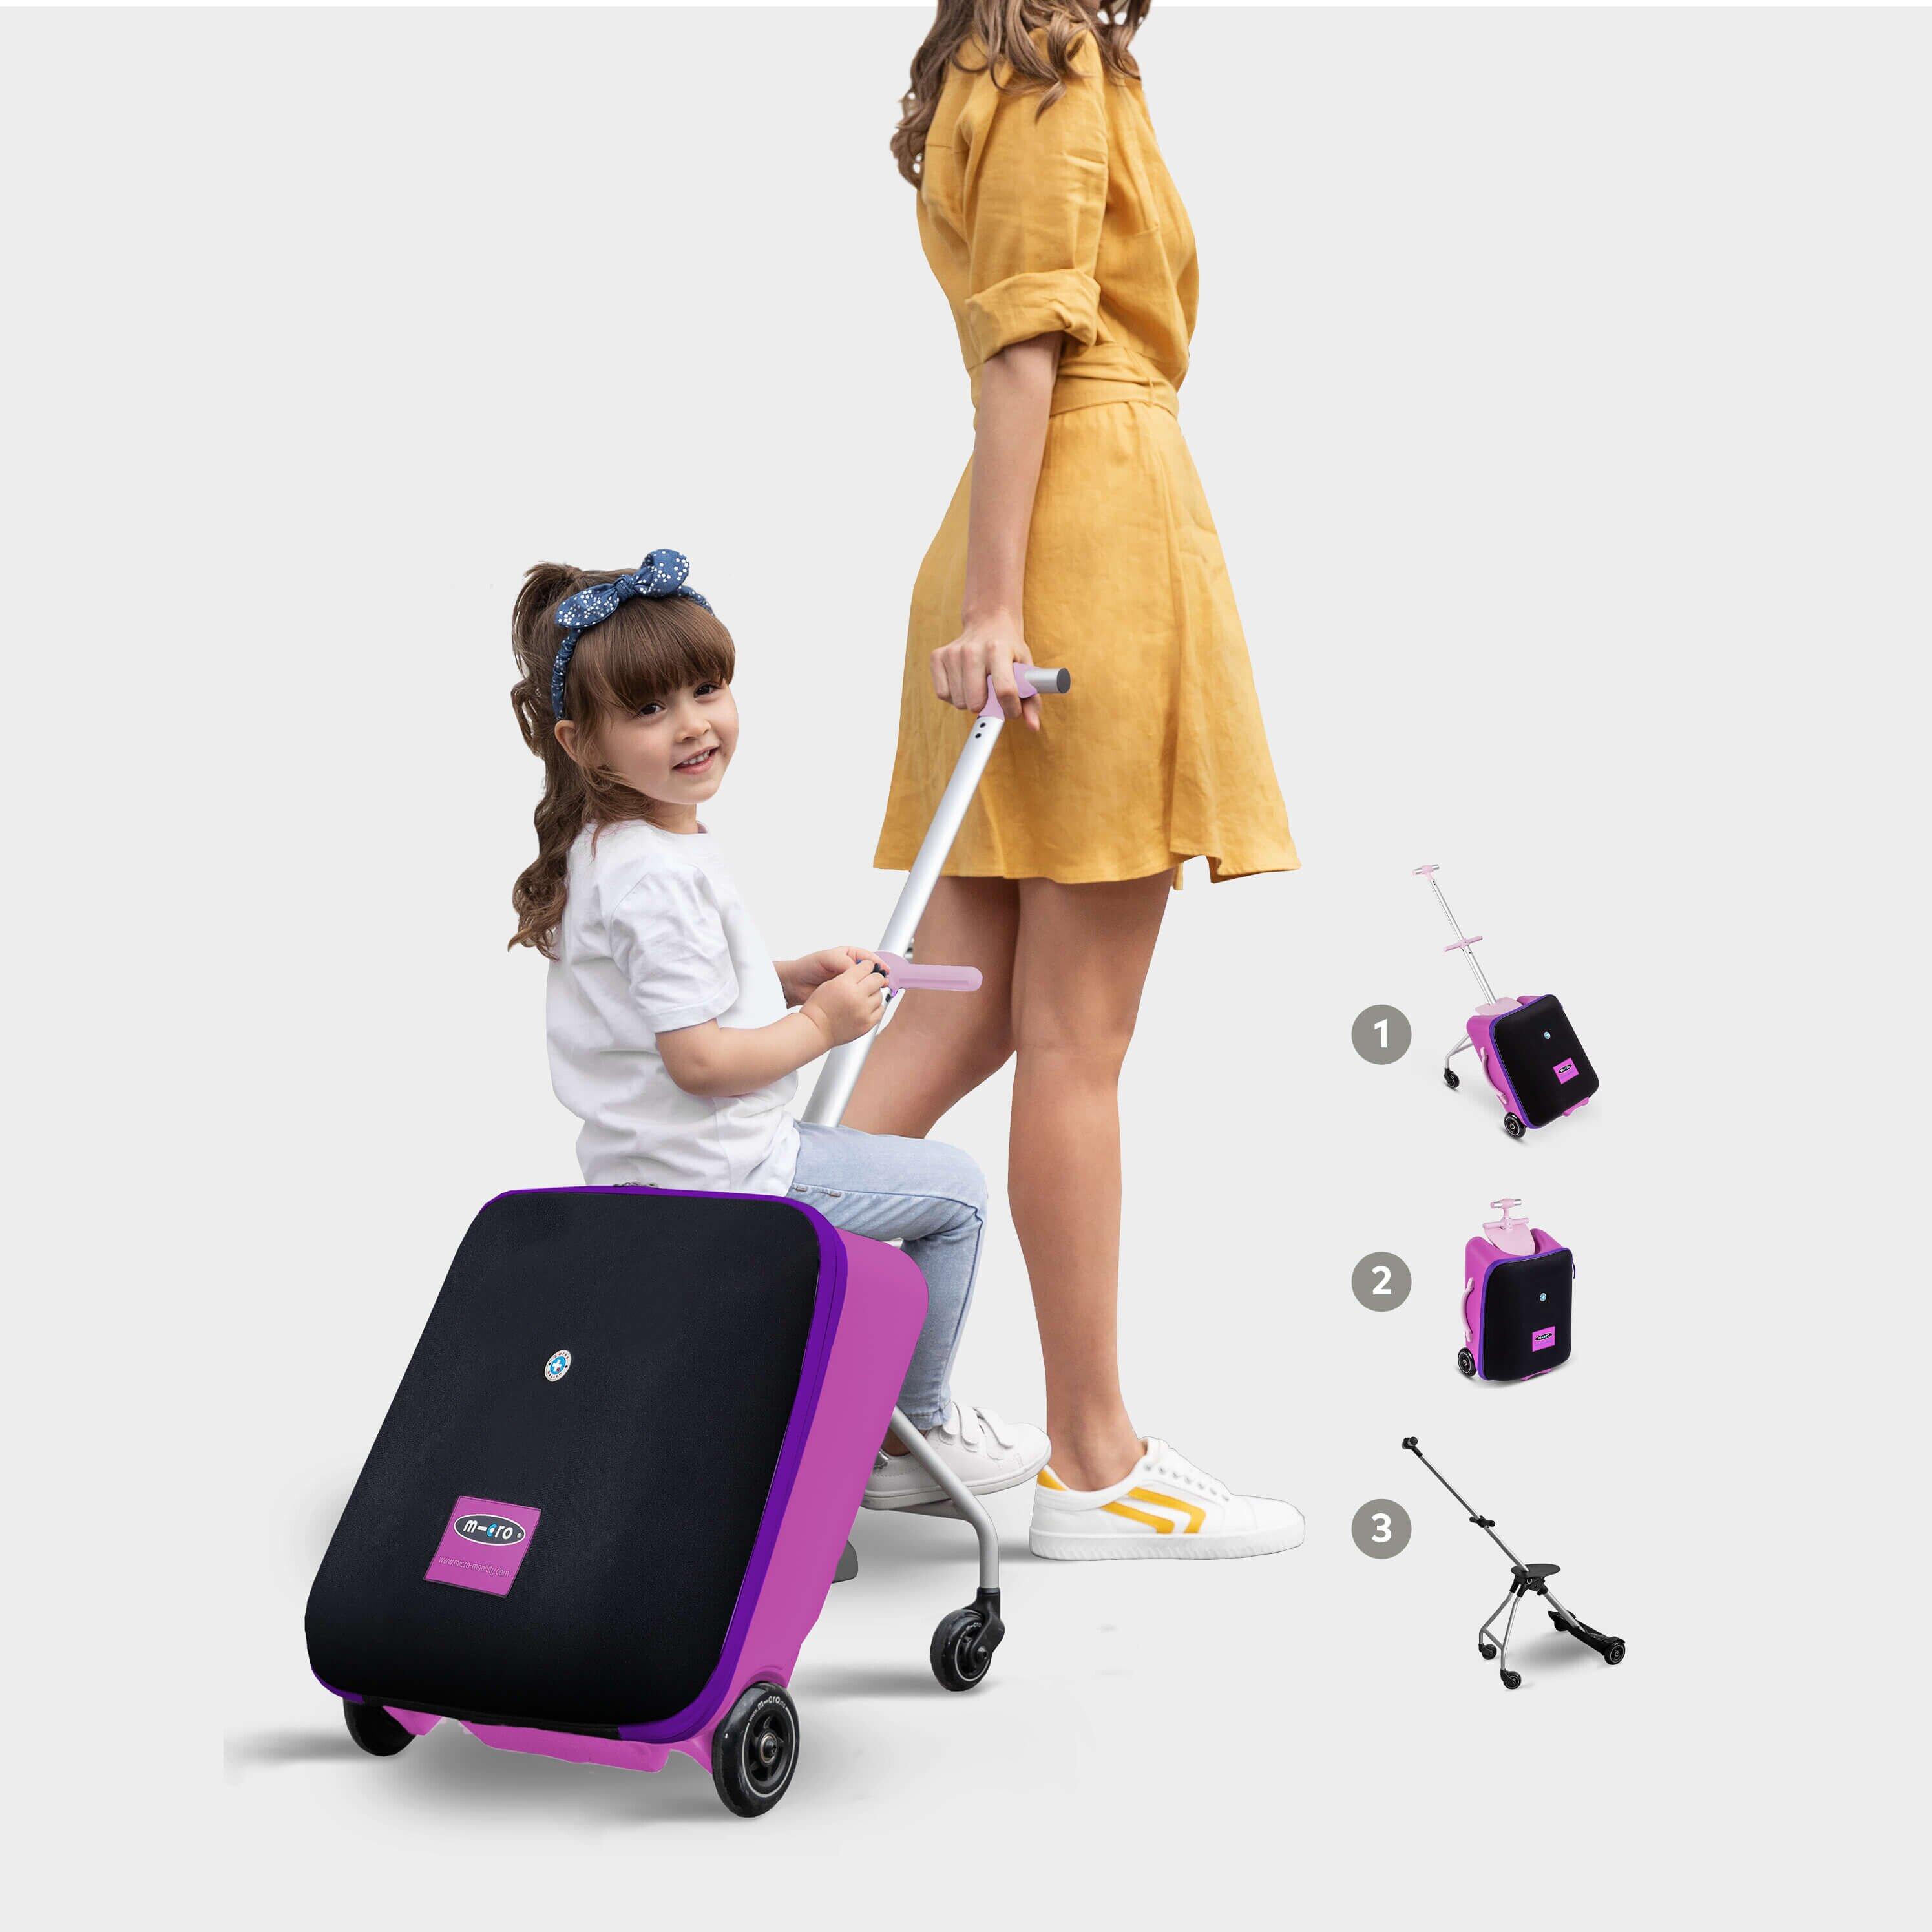 MICRO Micro Luggage Trike Scooter: Violet Pink